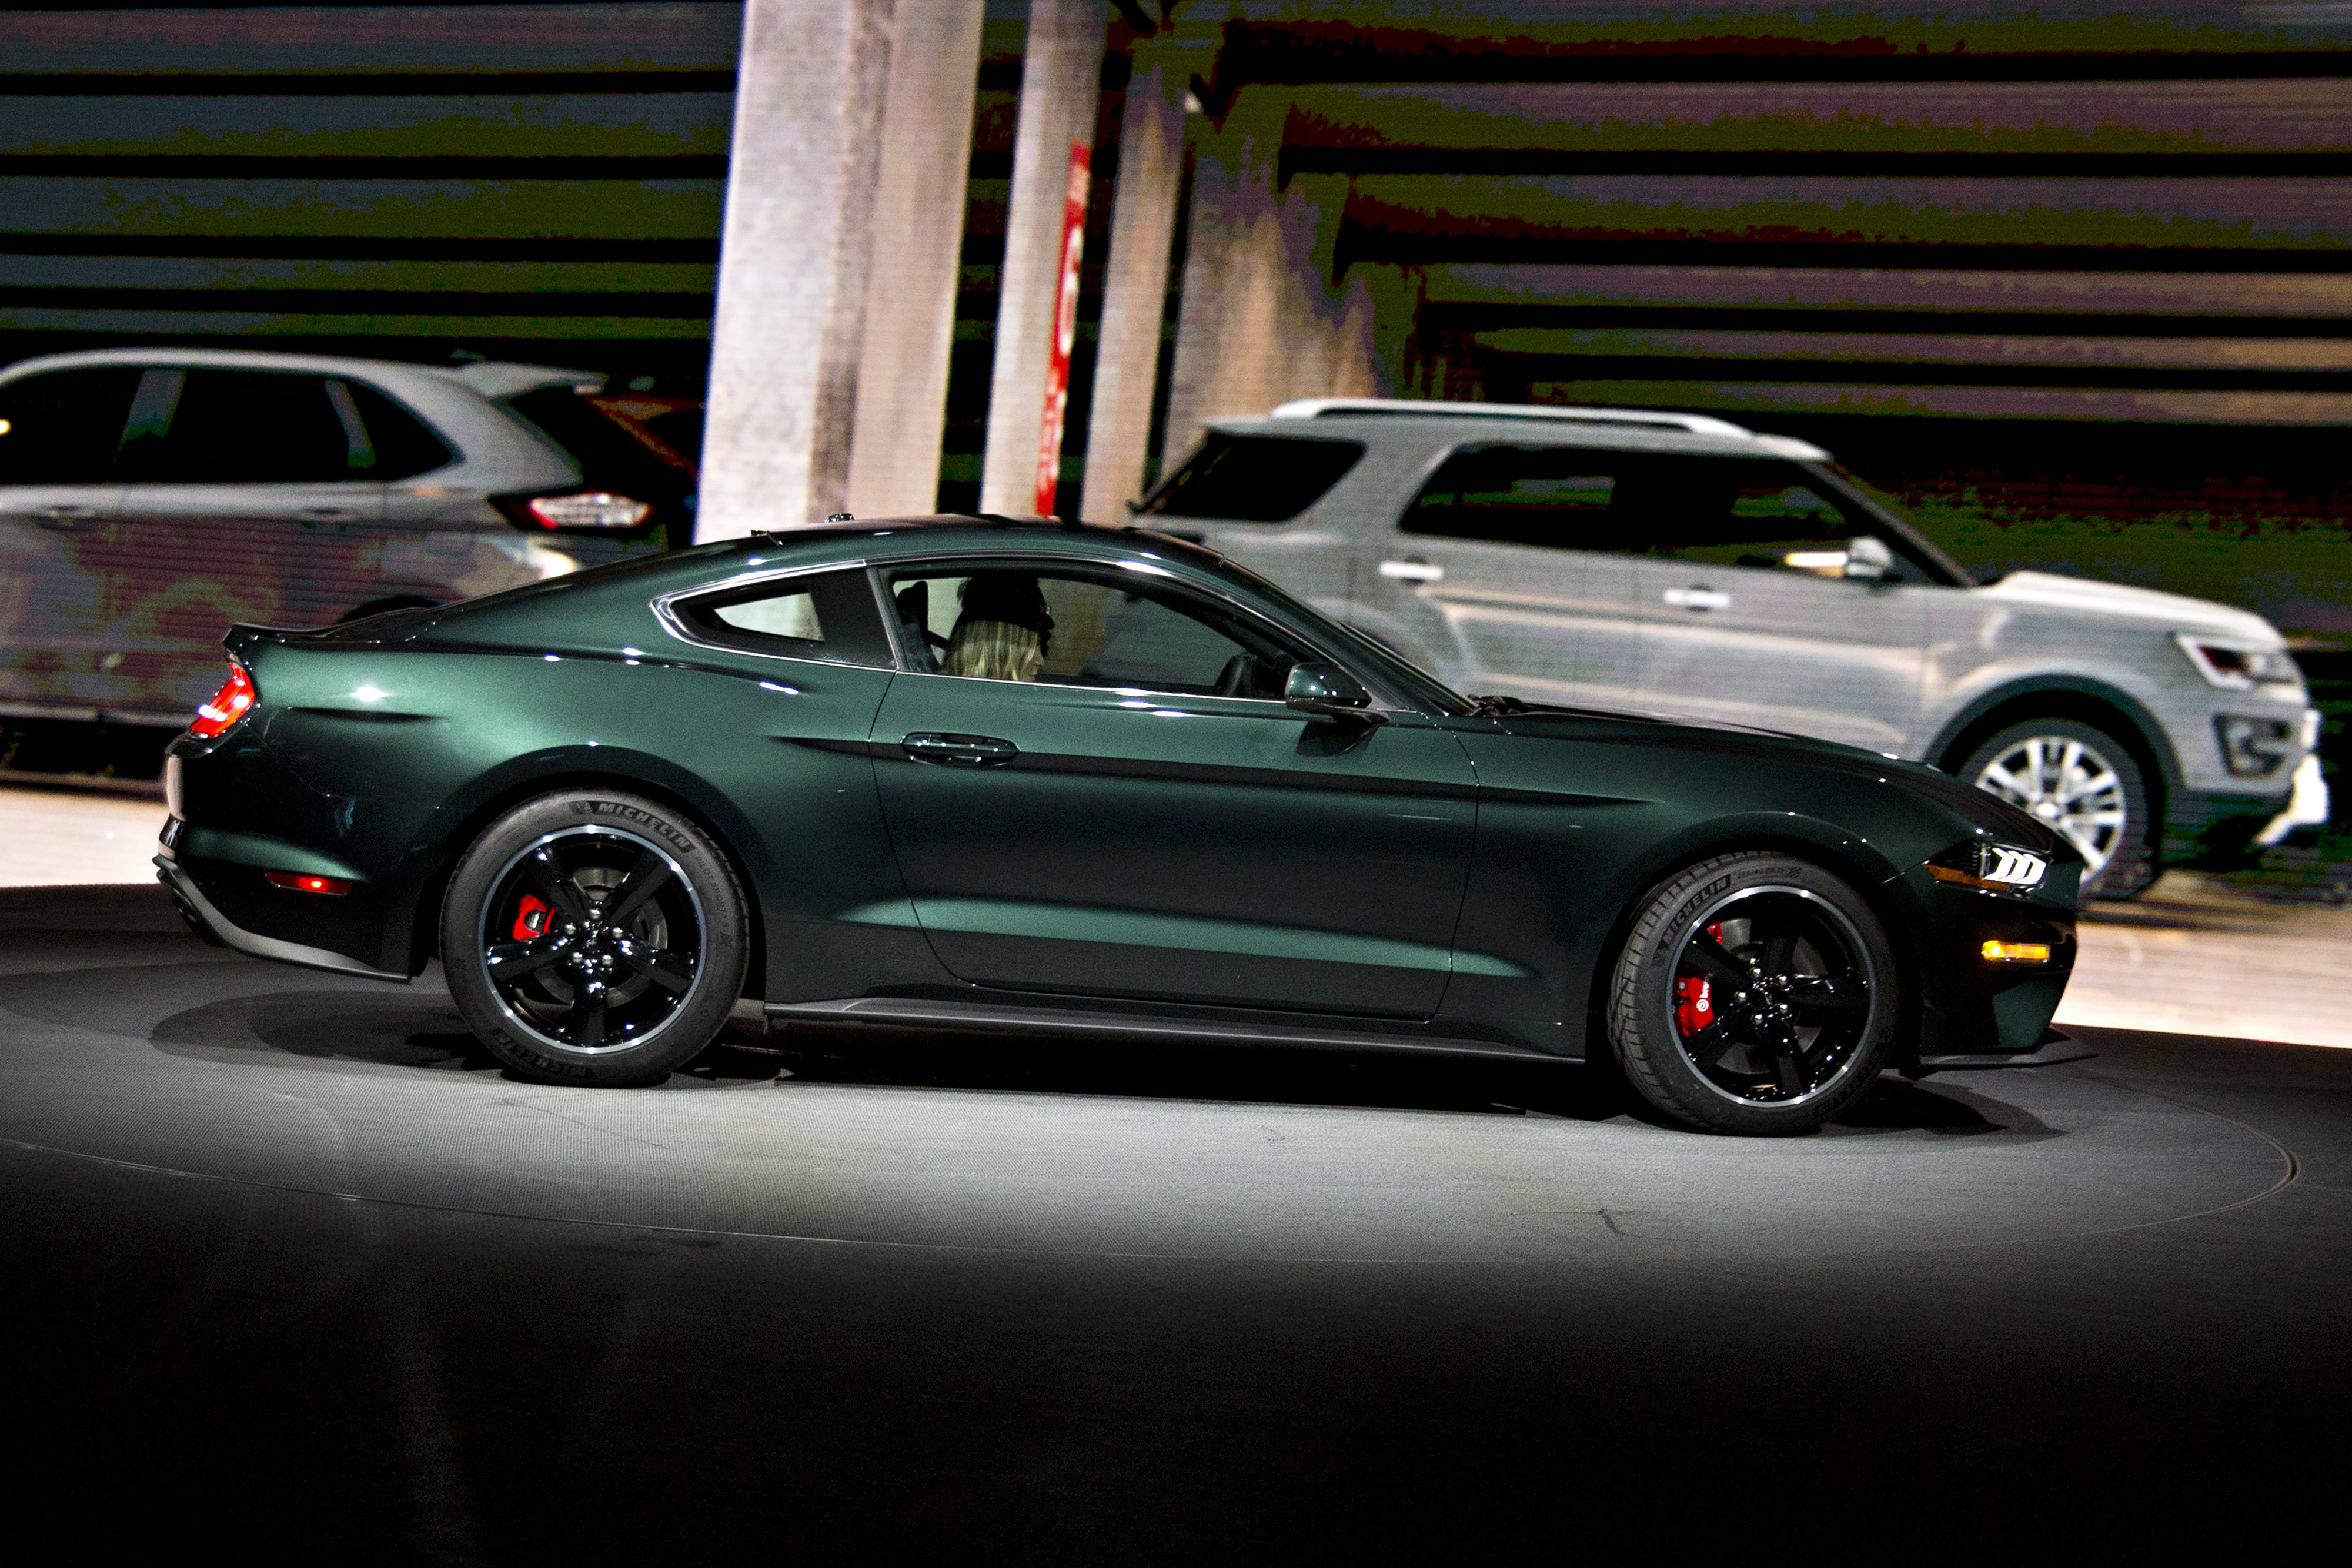 Ford unveiled the limited edition Mustang Bullitt sports car at the 2018 North American International Auto Show.